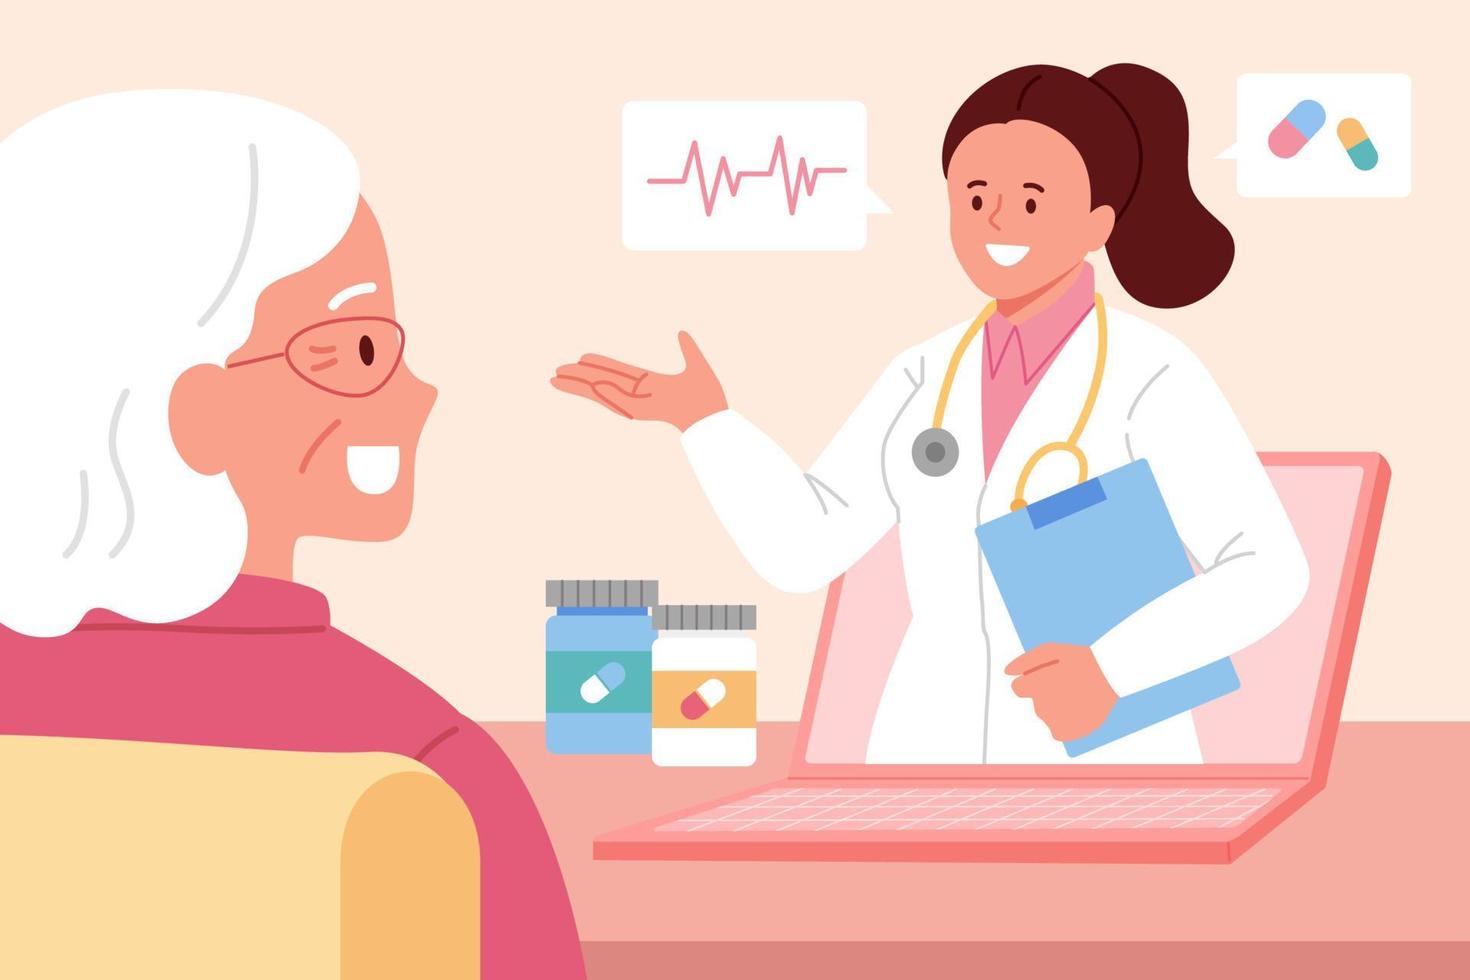 Elder with telemedicine support. Flat illustration of female doctor consulting a elderly woman about drug use and health check via online video call vector